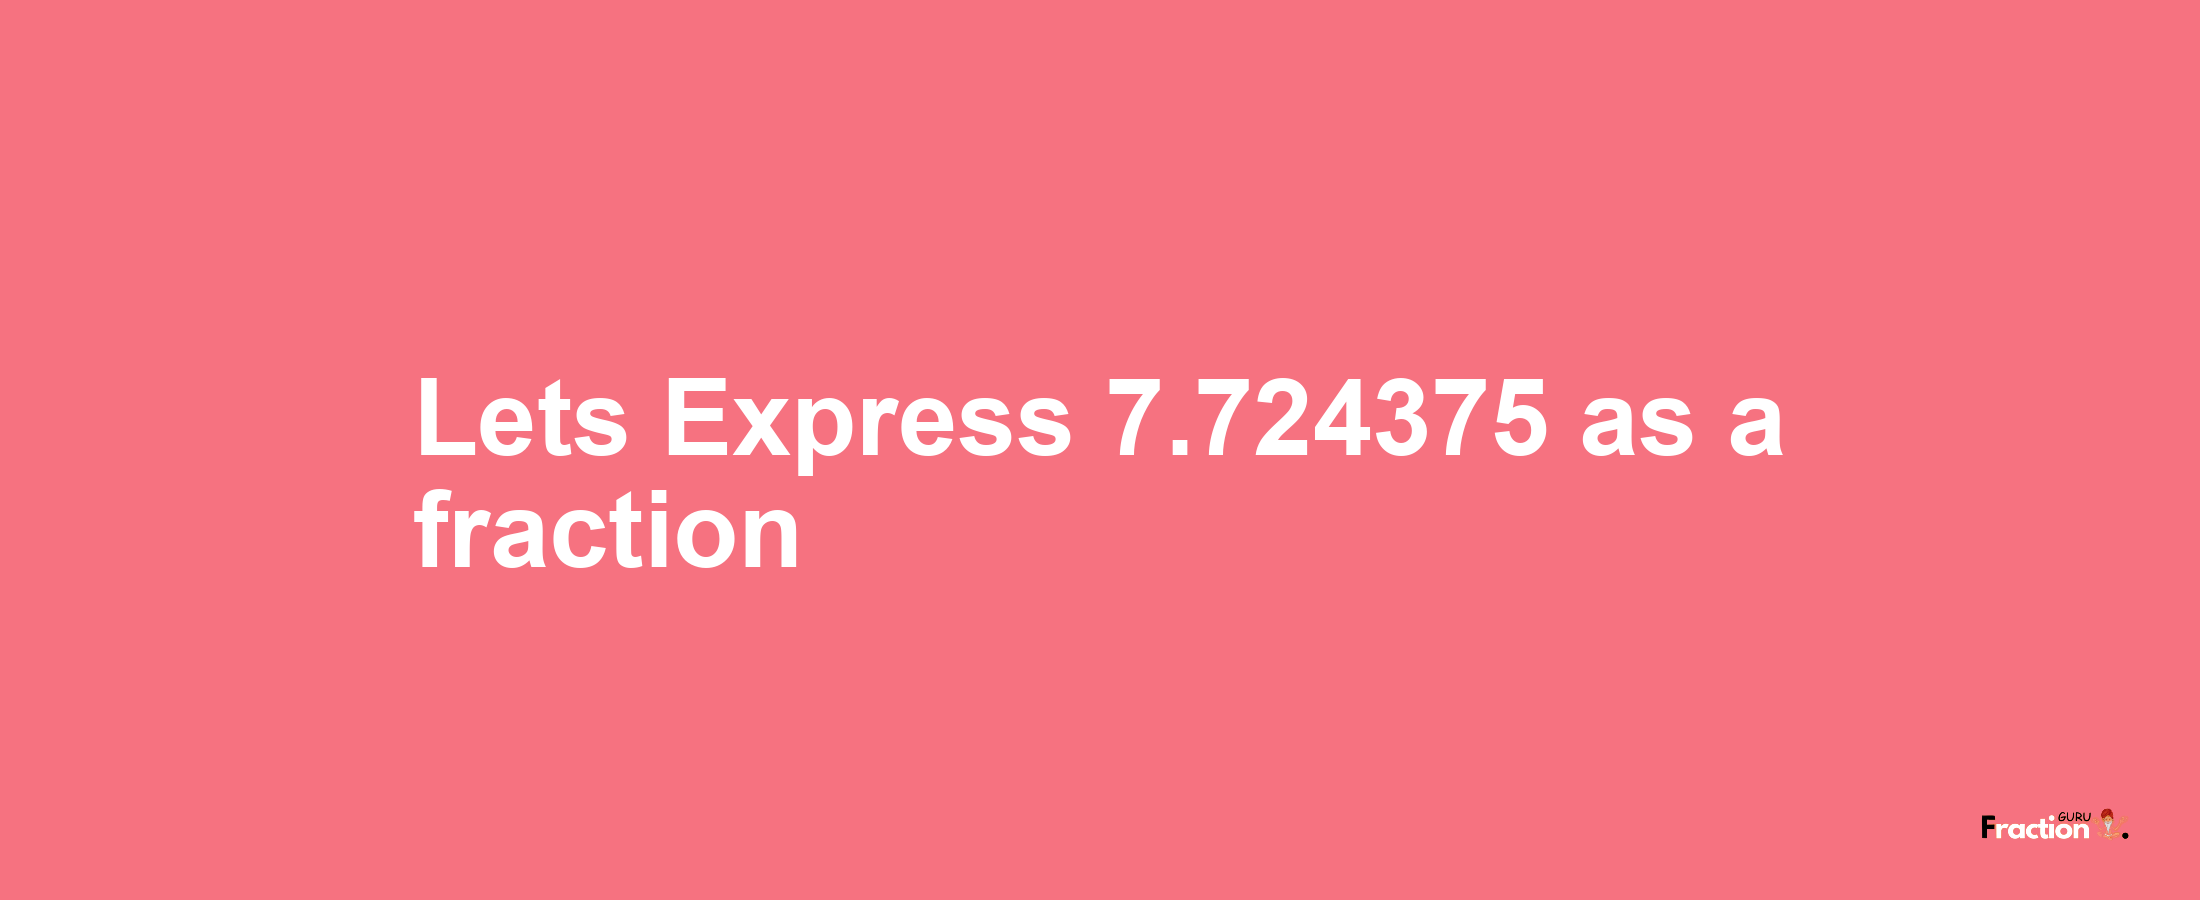 Lets Express 7.724375 as afraction